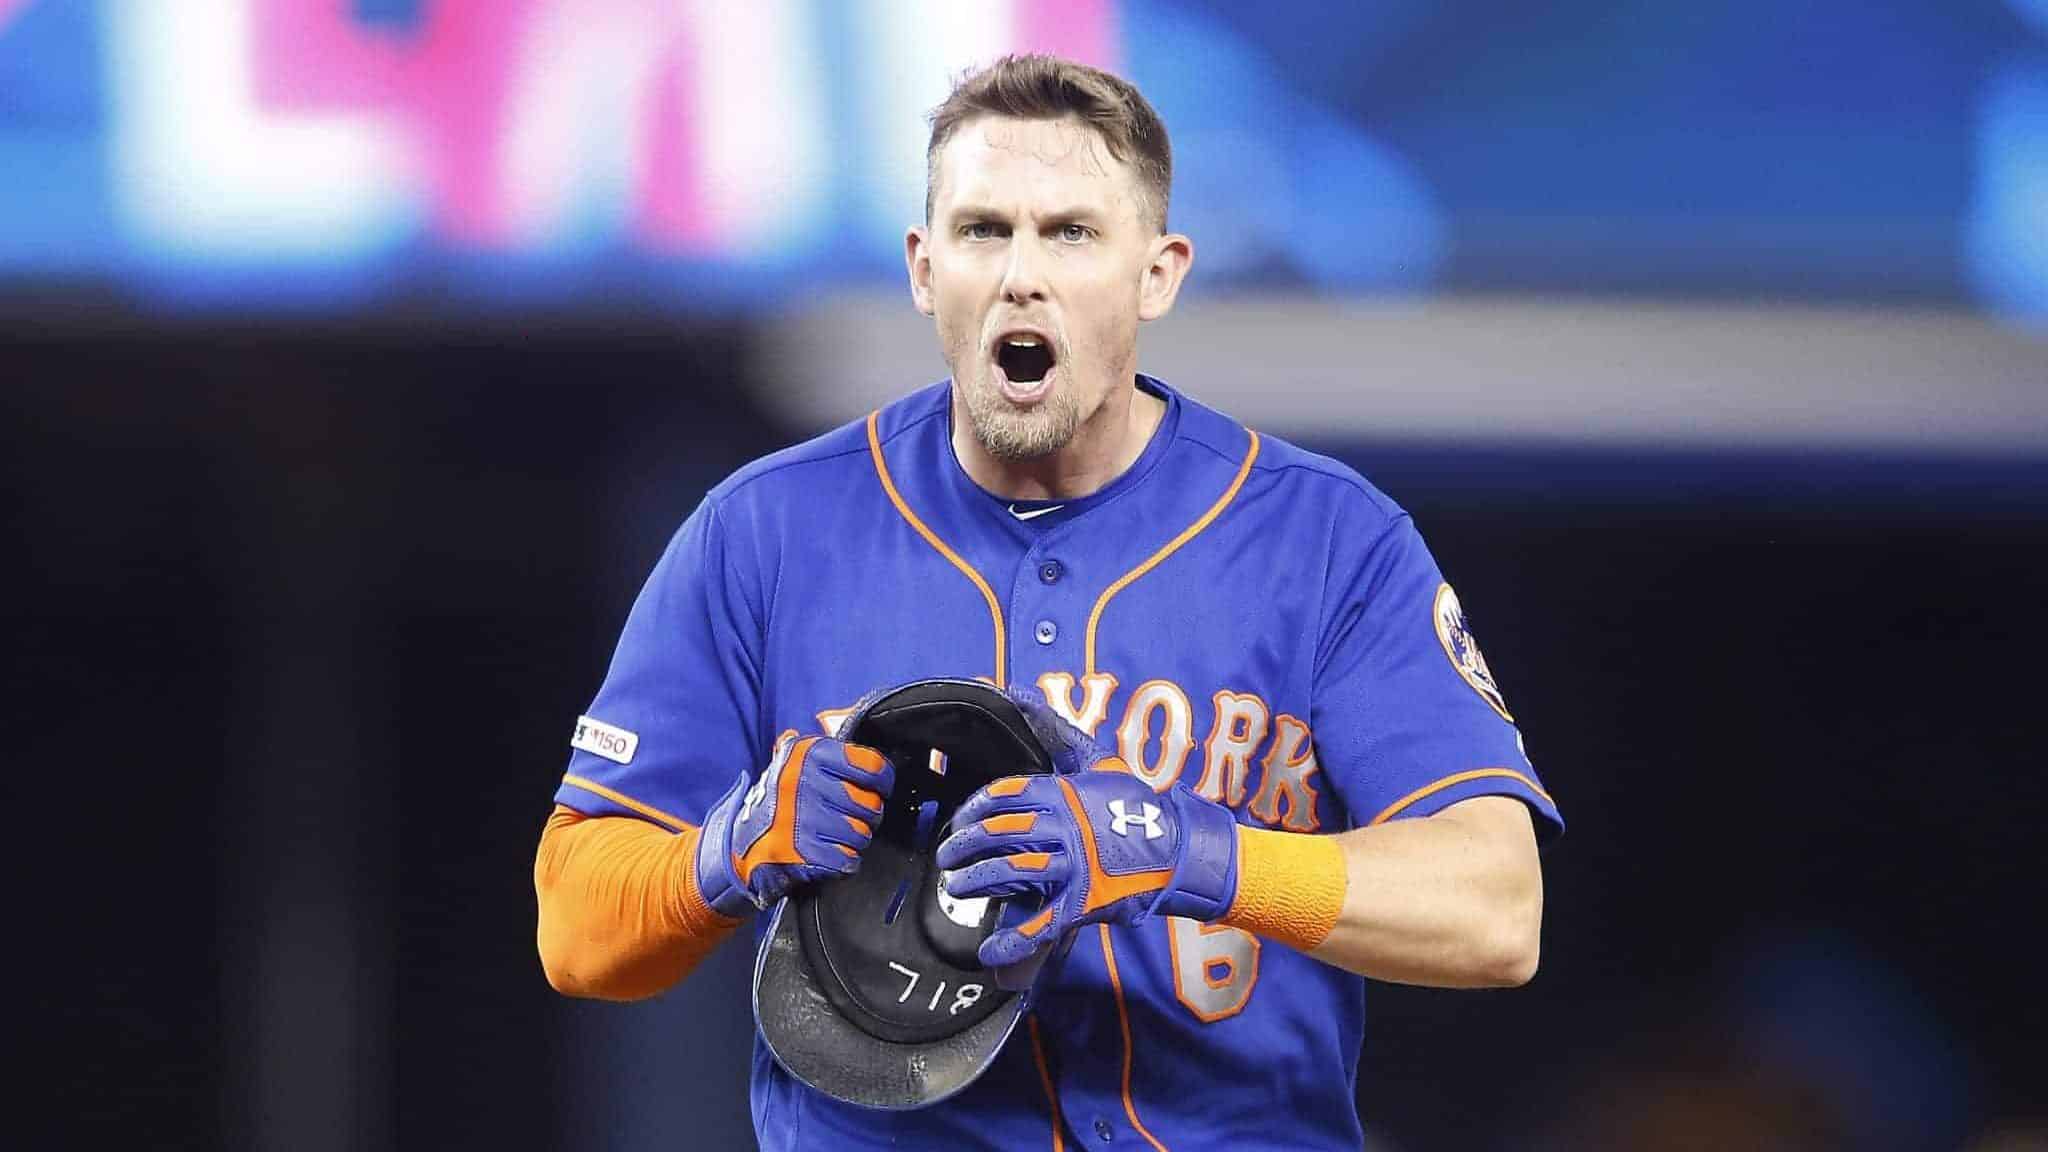 MIAMI, FLORIDA - JULY 13: Jeff McNeil #6 of the New York Mets reacts after being thrown out in the seventh inning against the Miami Marlins at Marlins Park on July 13, 2019 in Miami, Florida.